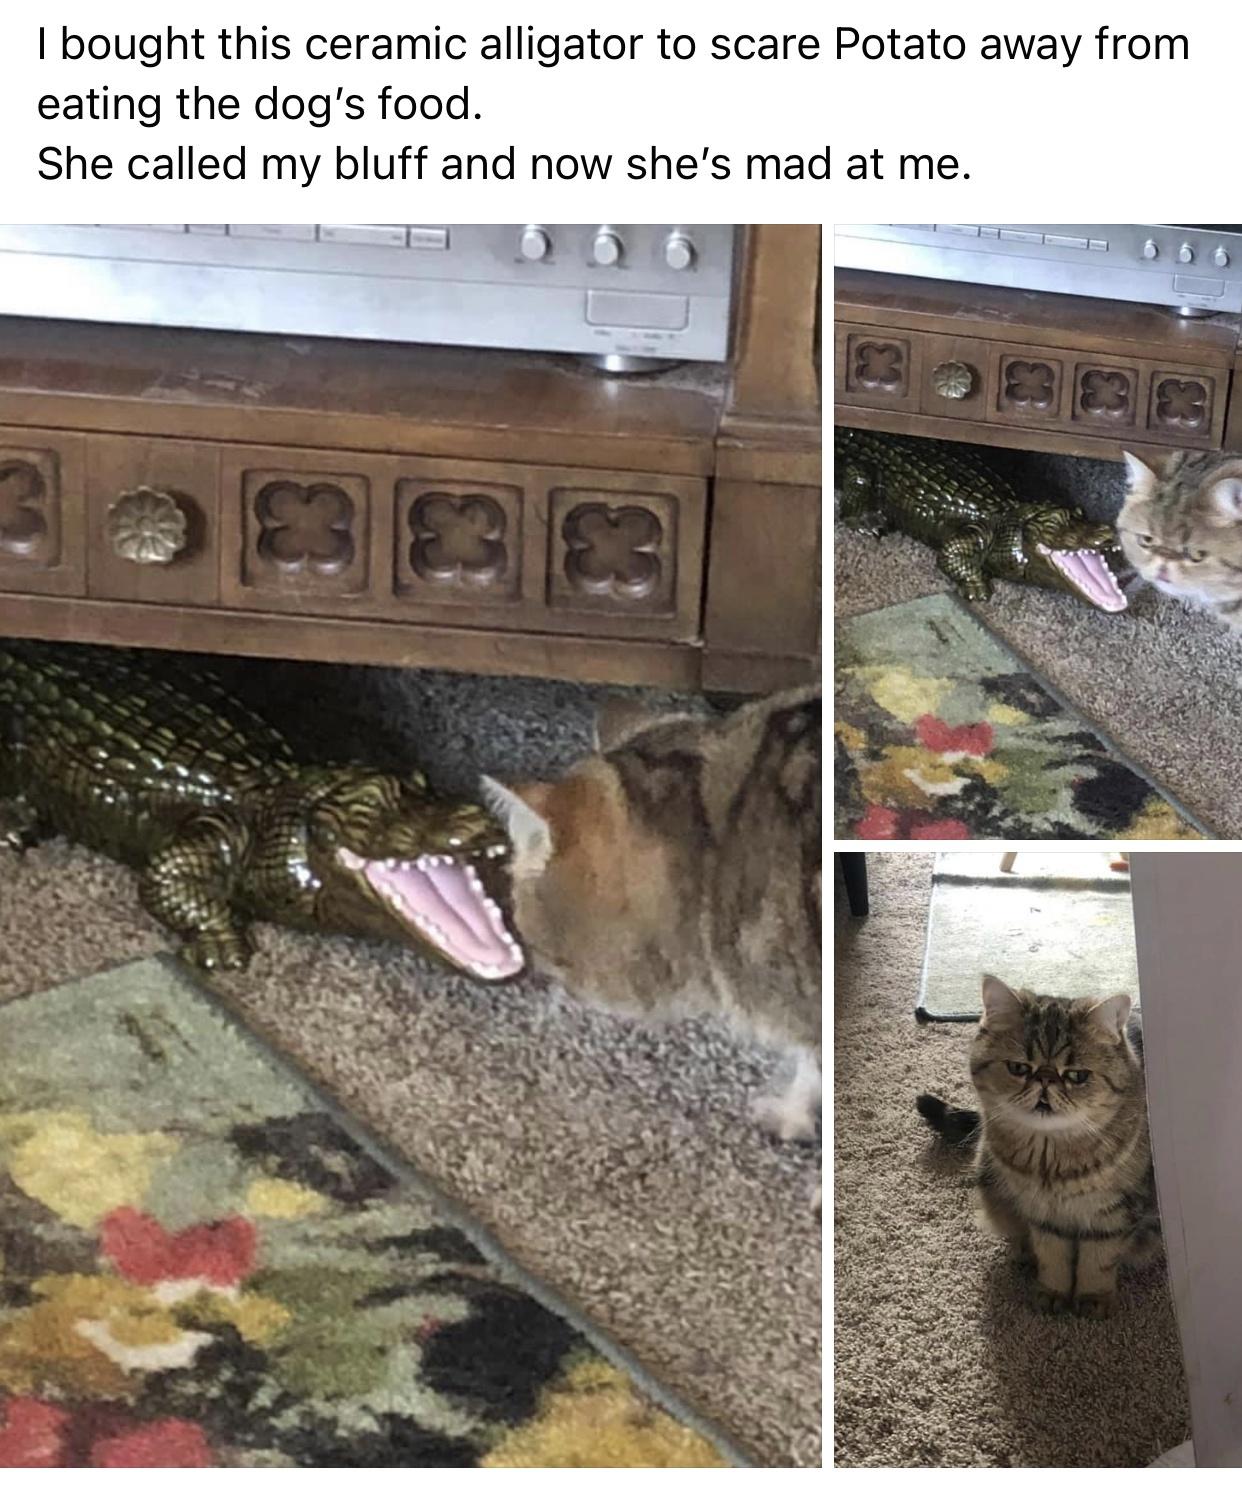 monday morning randomness - fauna - I bought this ceramic alligator to scare Potato away from eating the dog's food. She called my bluff and now she's mad at me.